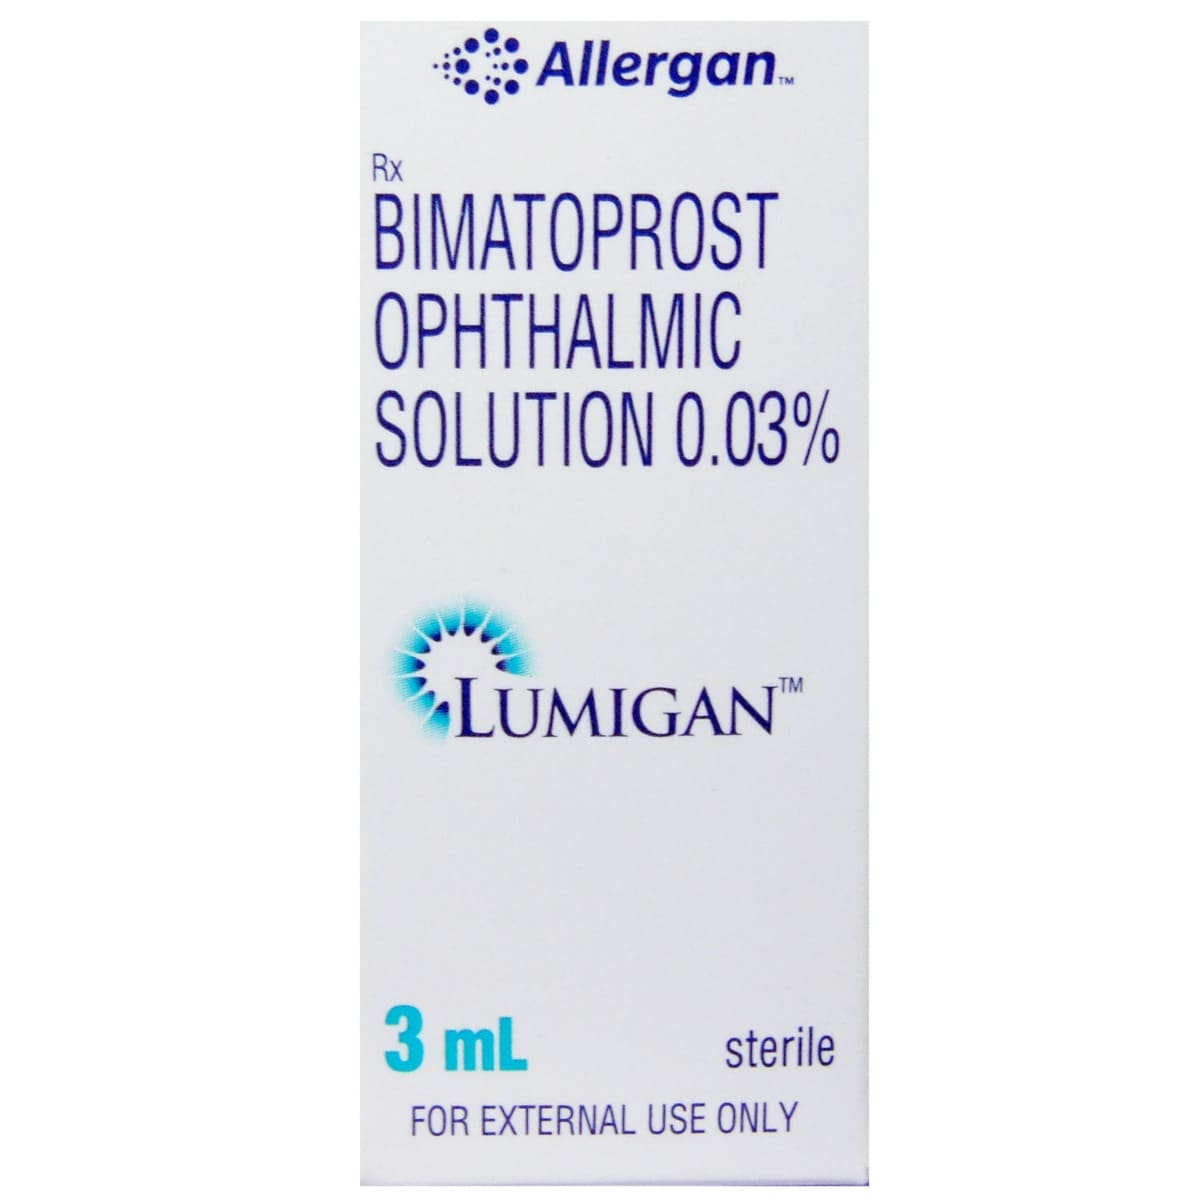 Lumigan Eye Drops 3 ml Price, Uses, Side Effects, Composition Apollo